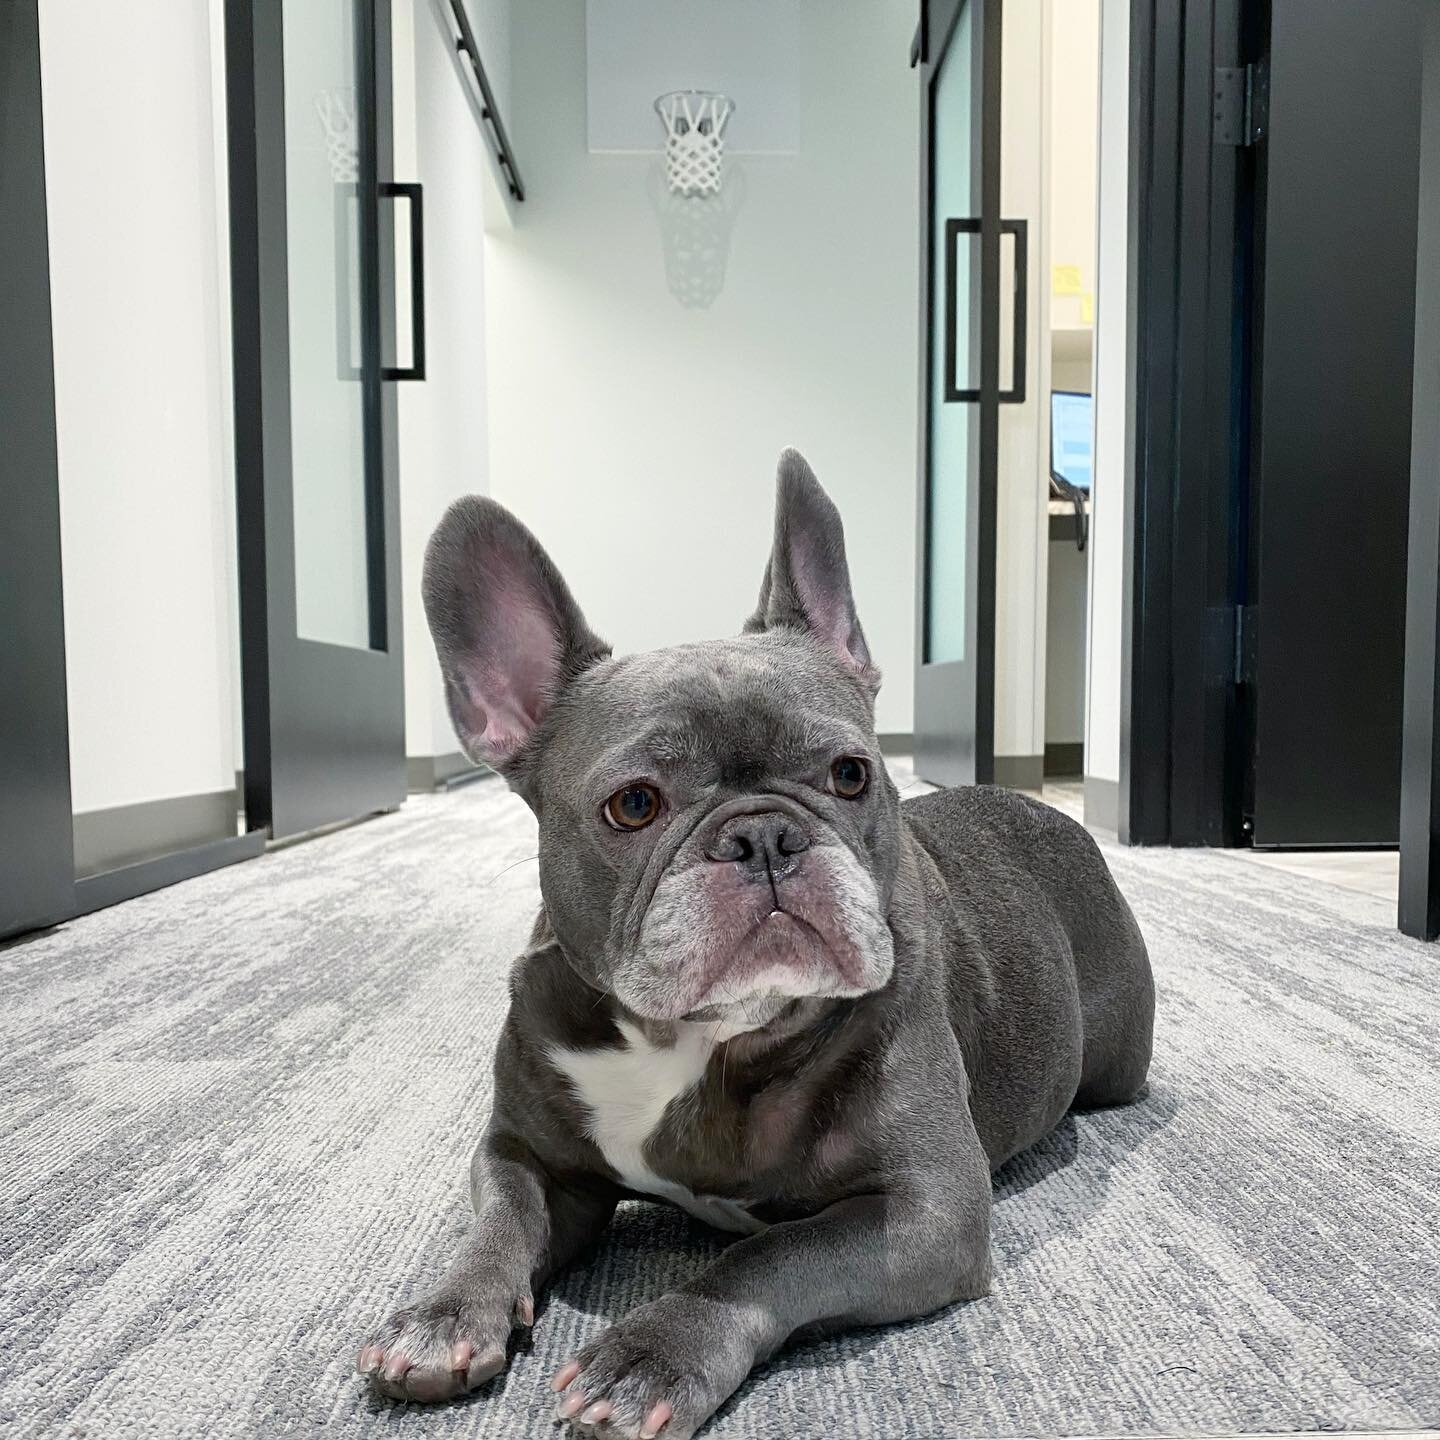 Happy 6th birthday to our beloved Muggsy, everyone&rsquo;s favorite little greeter!
.
.
.
#seattledentist #seattleorthodontist #belltowndentist #belltownorthodontist #dentist #orthodontist #dentistry #orthodontics #dentaloffice #dental #frenchbulldog